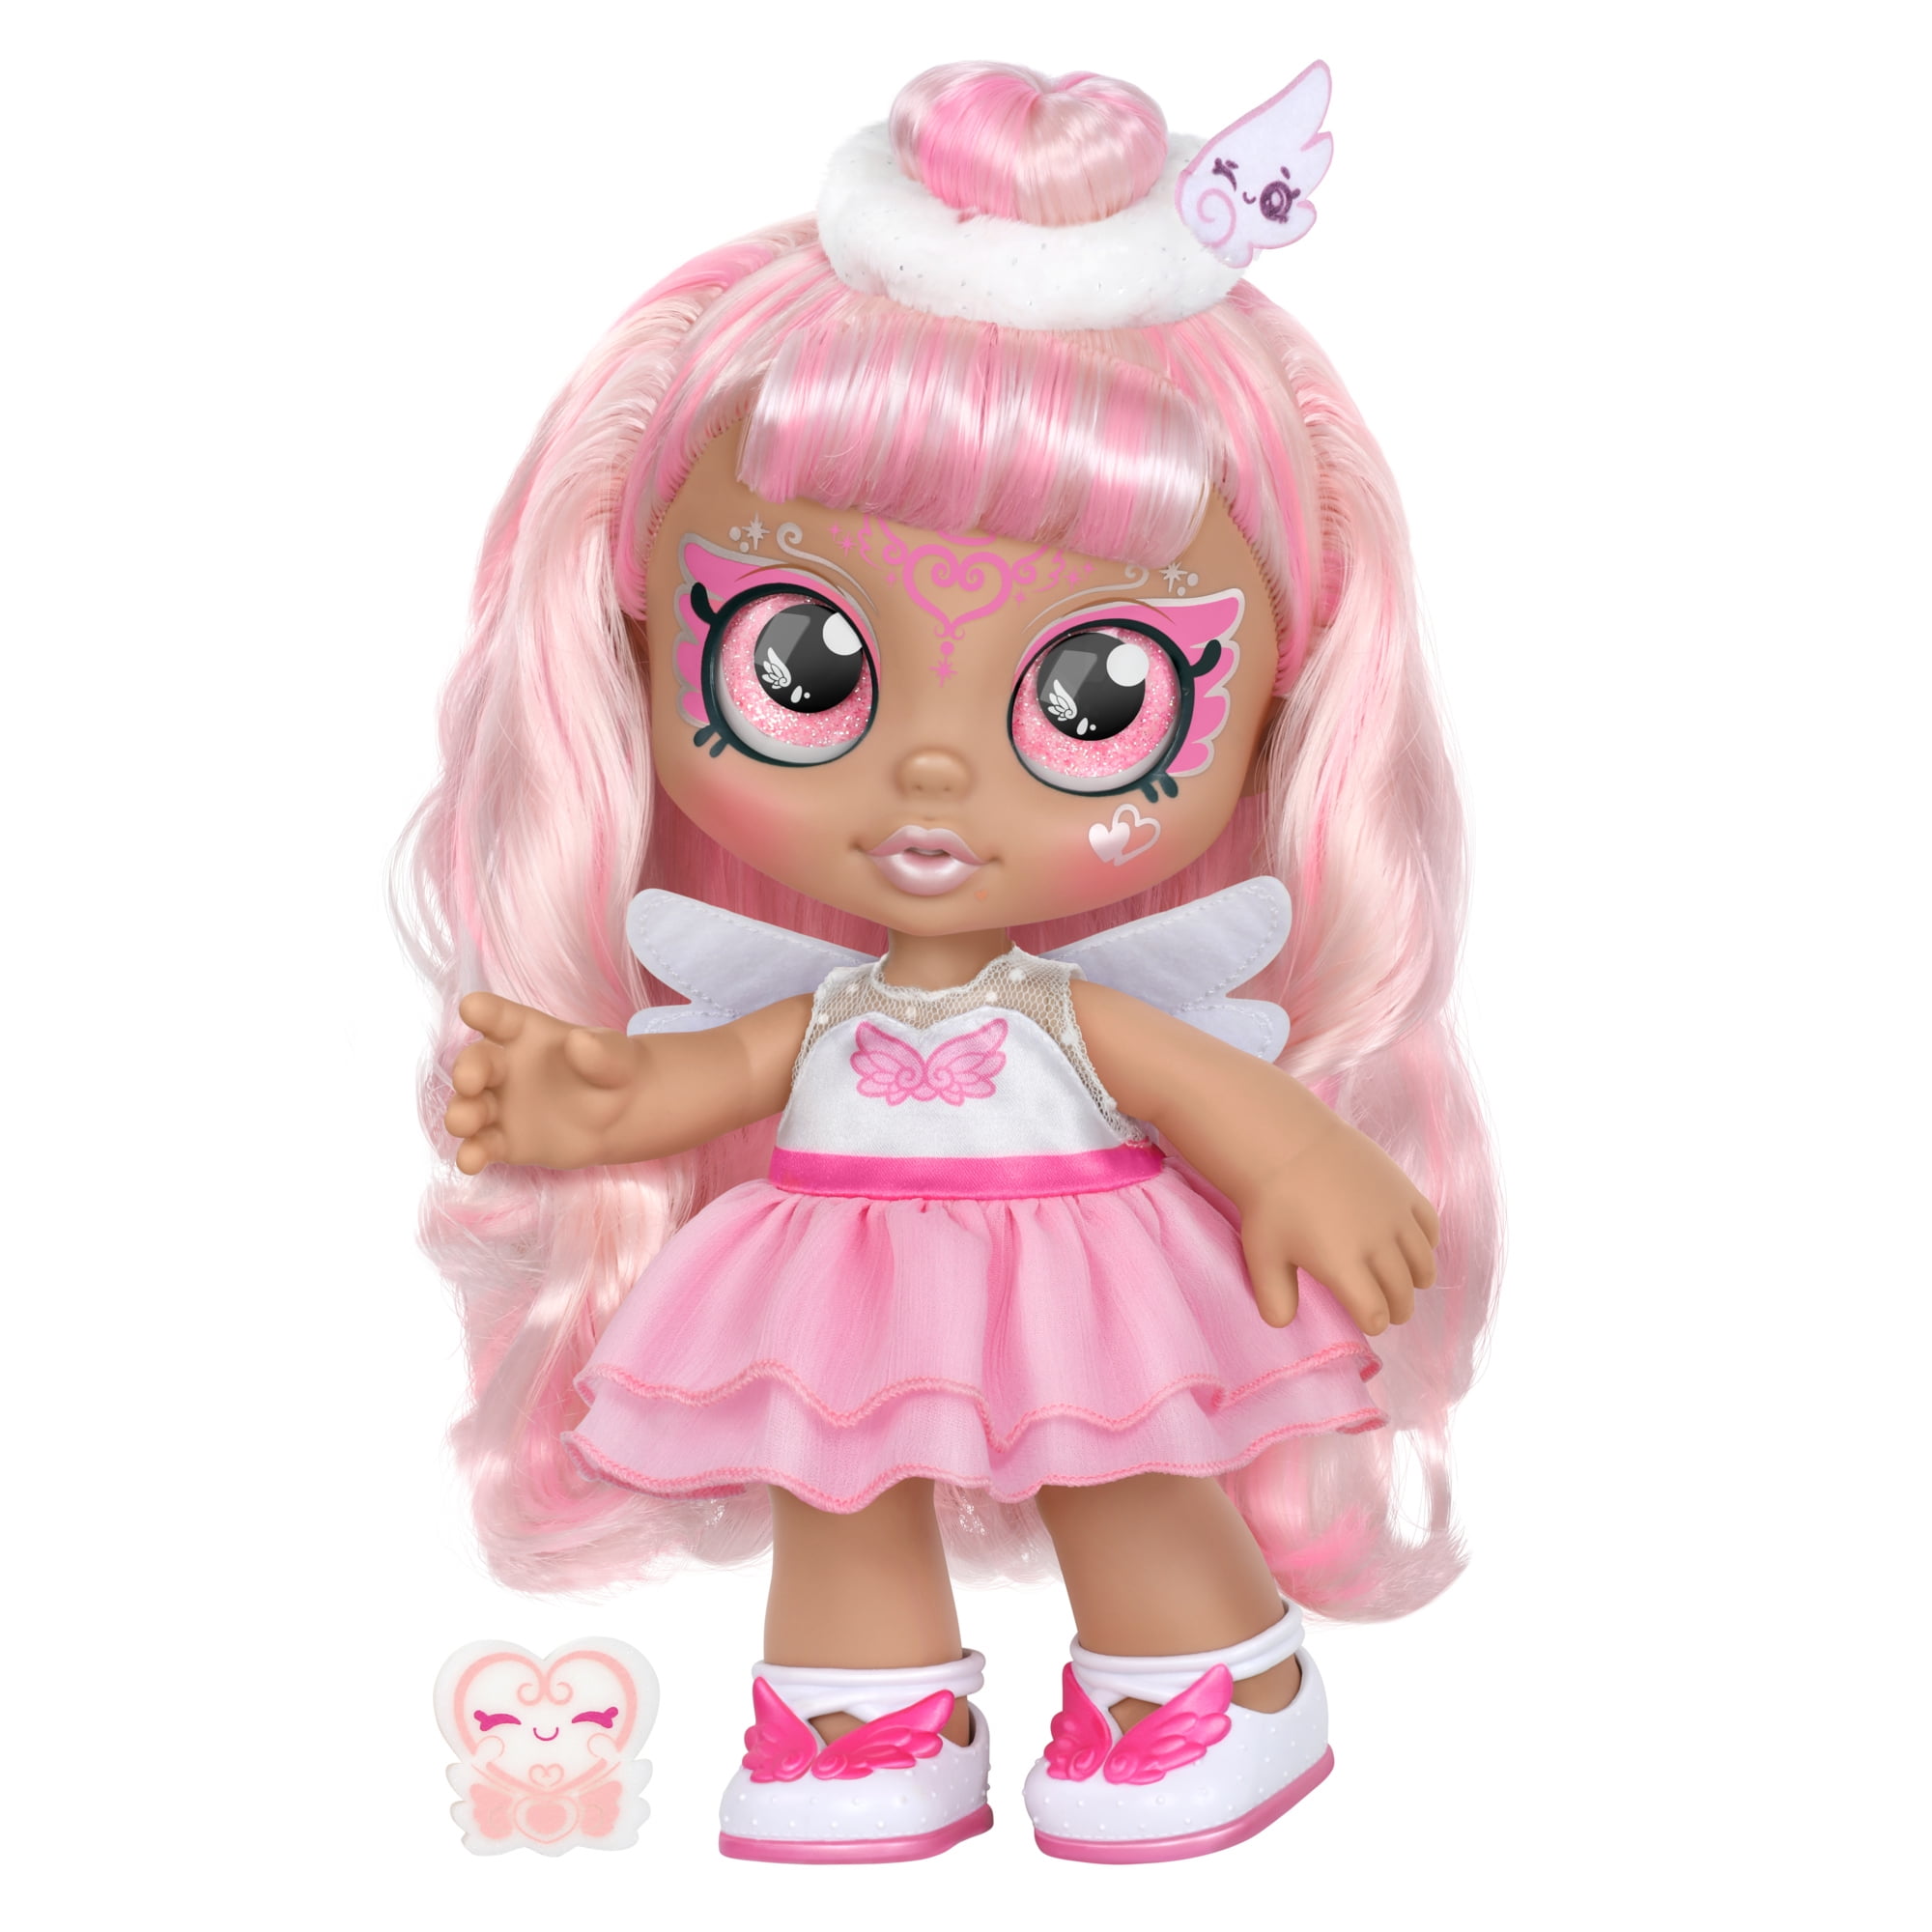 Dr Cindy Pops Kindi Kids 10 inch Doll Toddler and 2 Shopkin Accessories Fun Time 